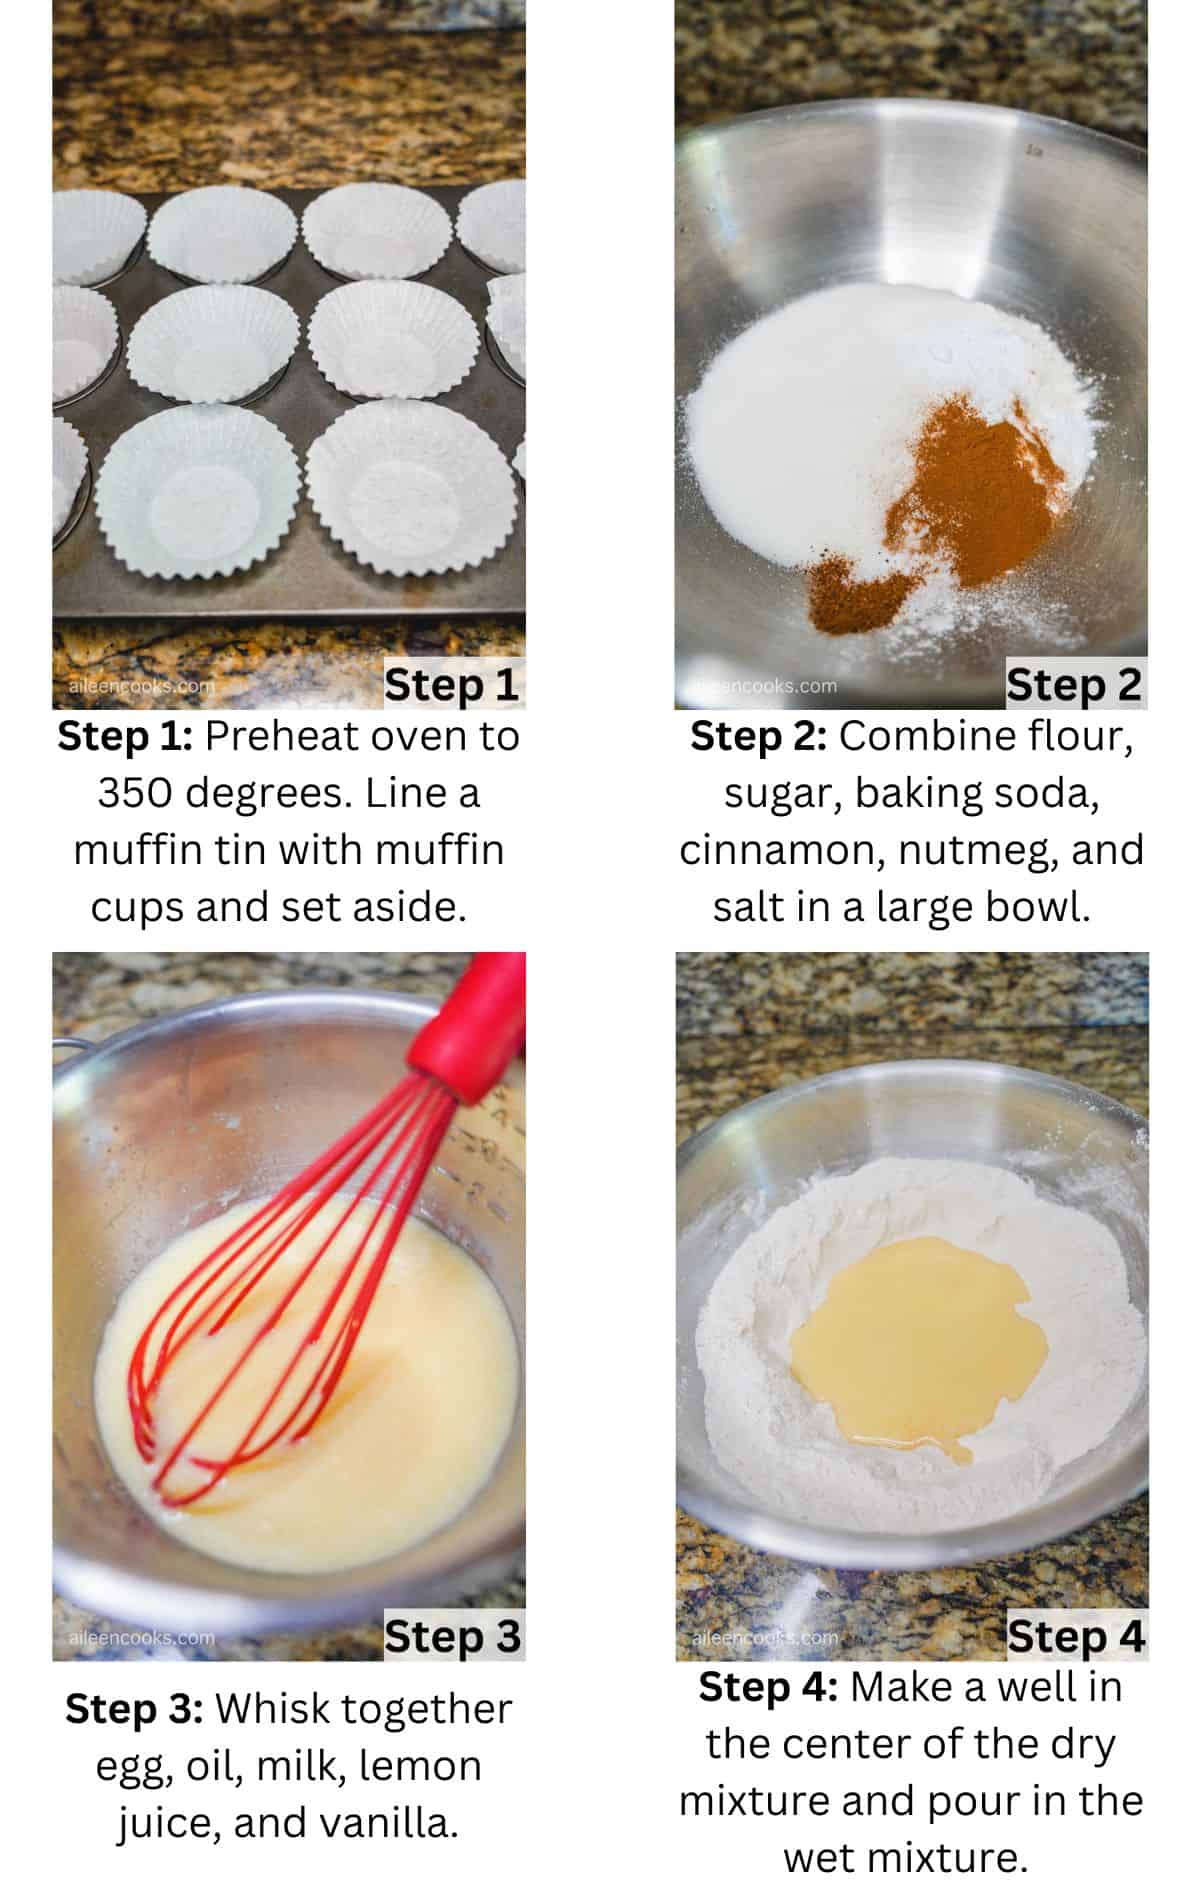 Collage photo of steps 1 through 4 for making chocolate chip zucchini muffins.